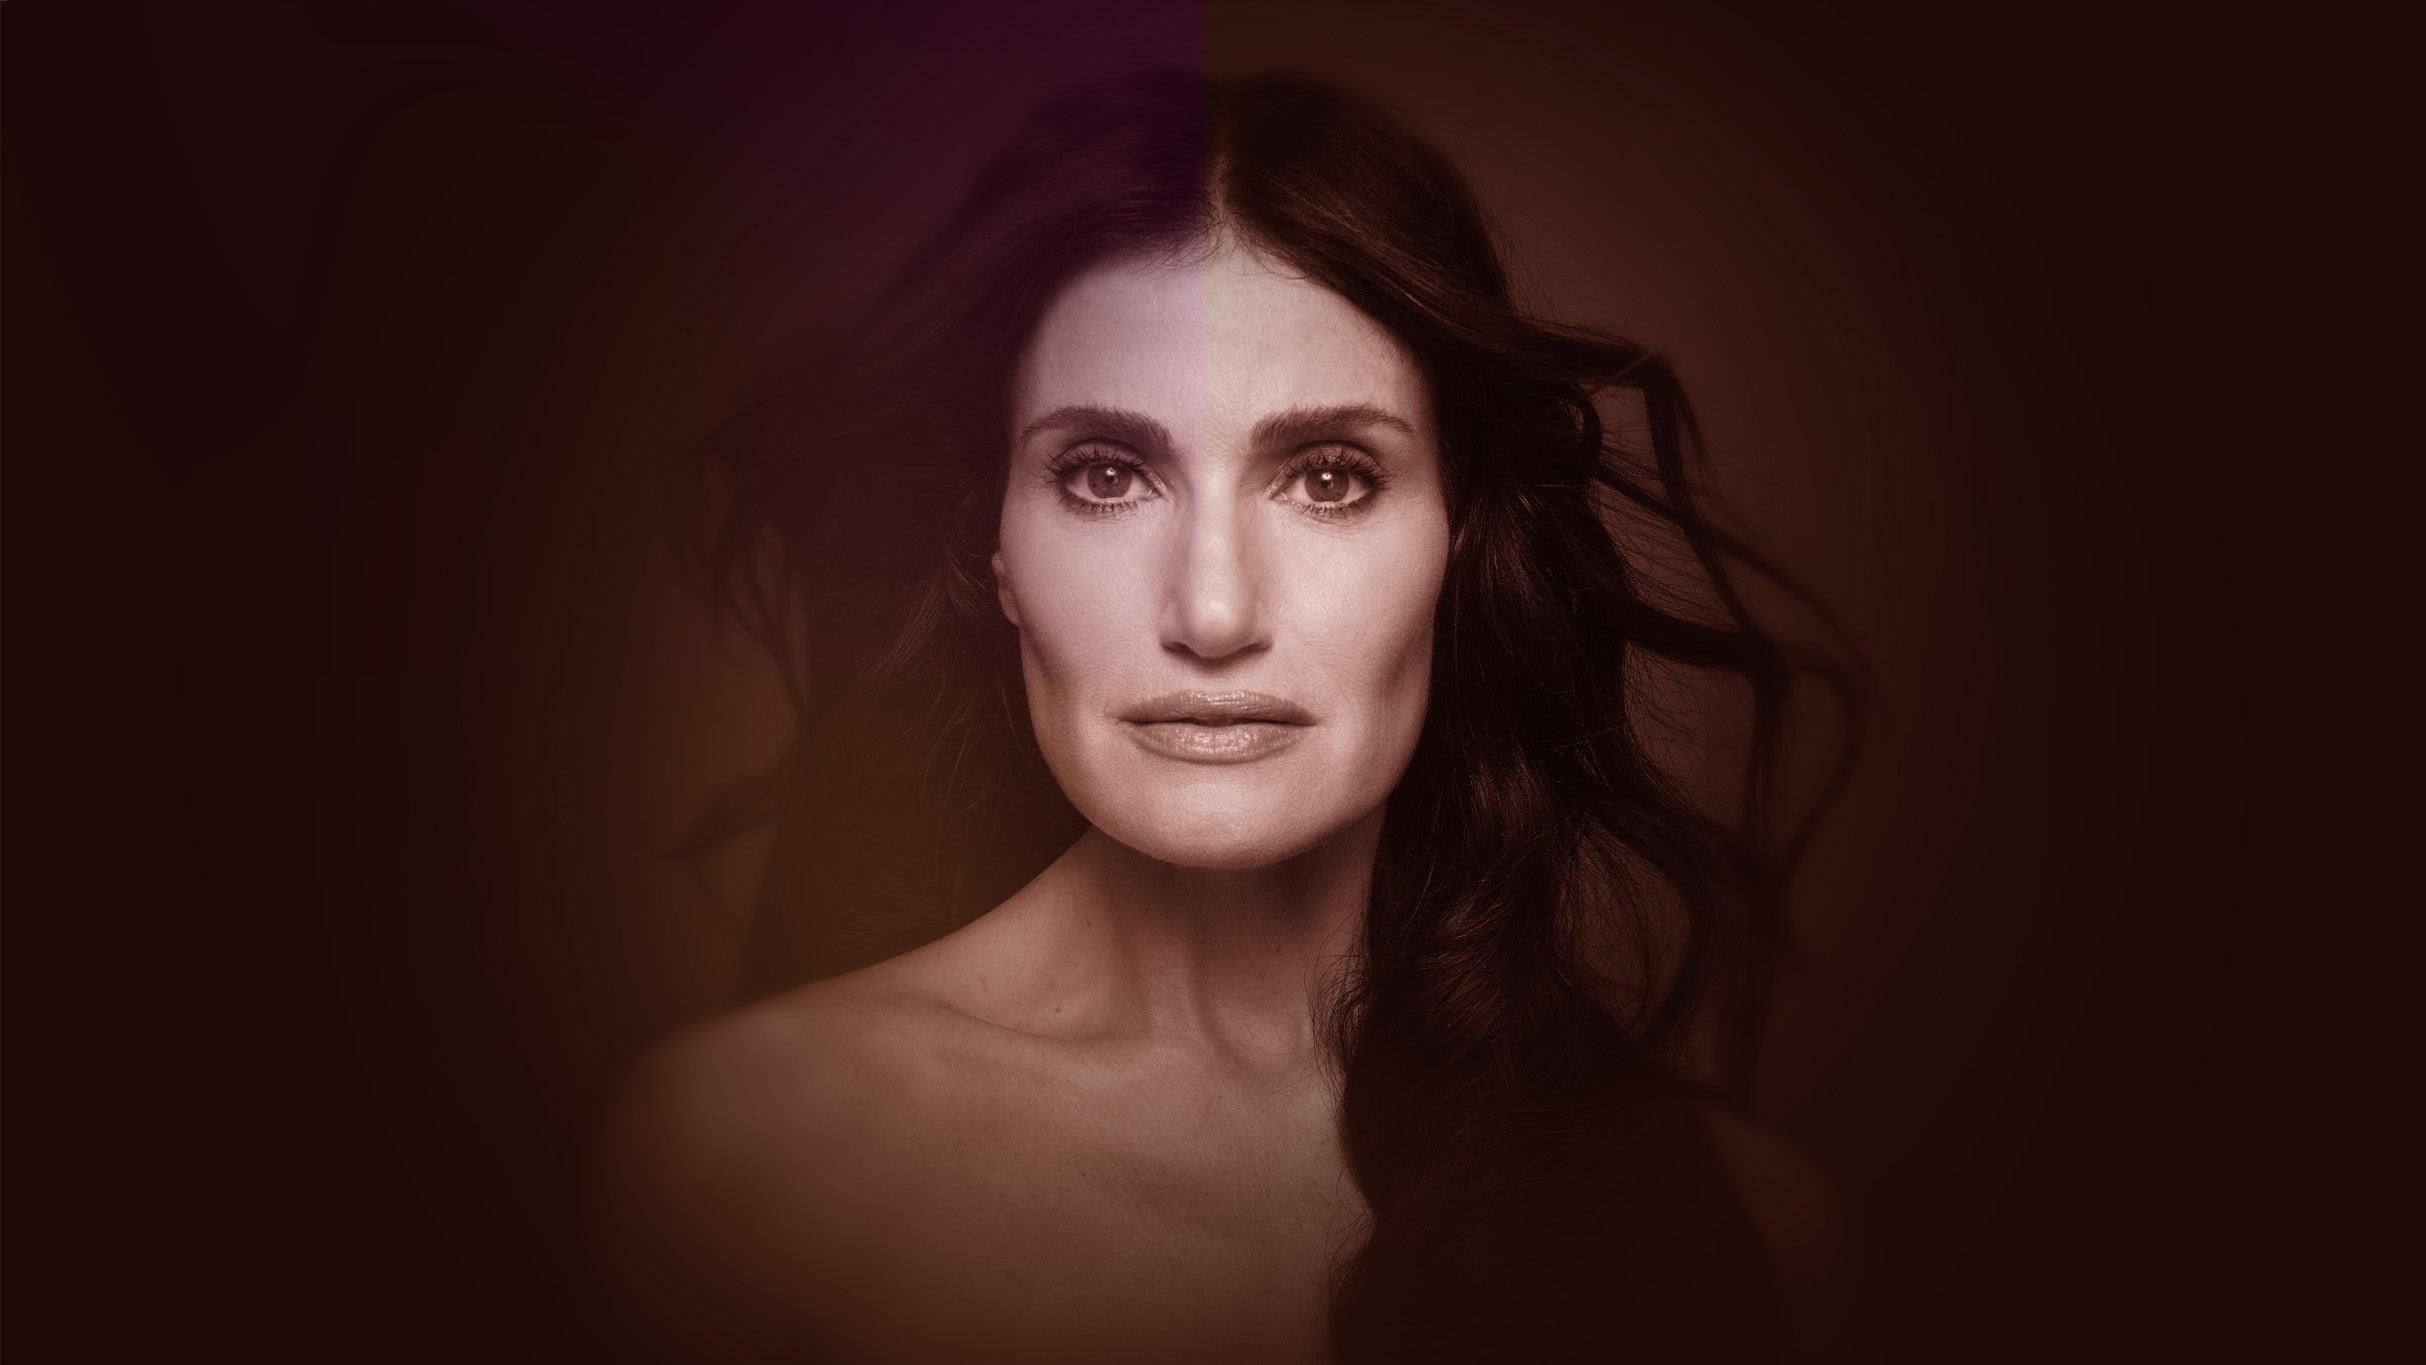 presale password for Idina Menzel tickets in New York